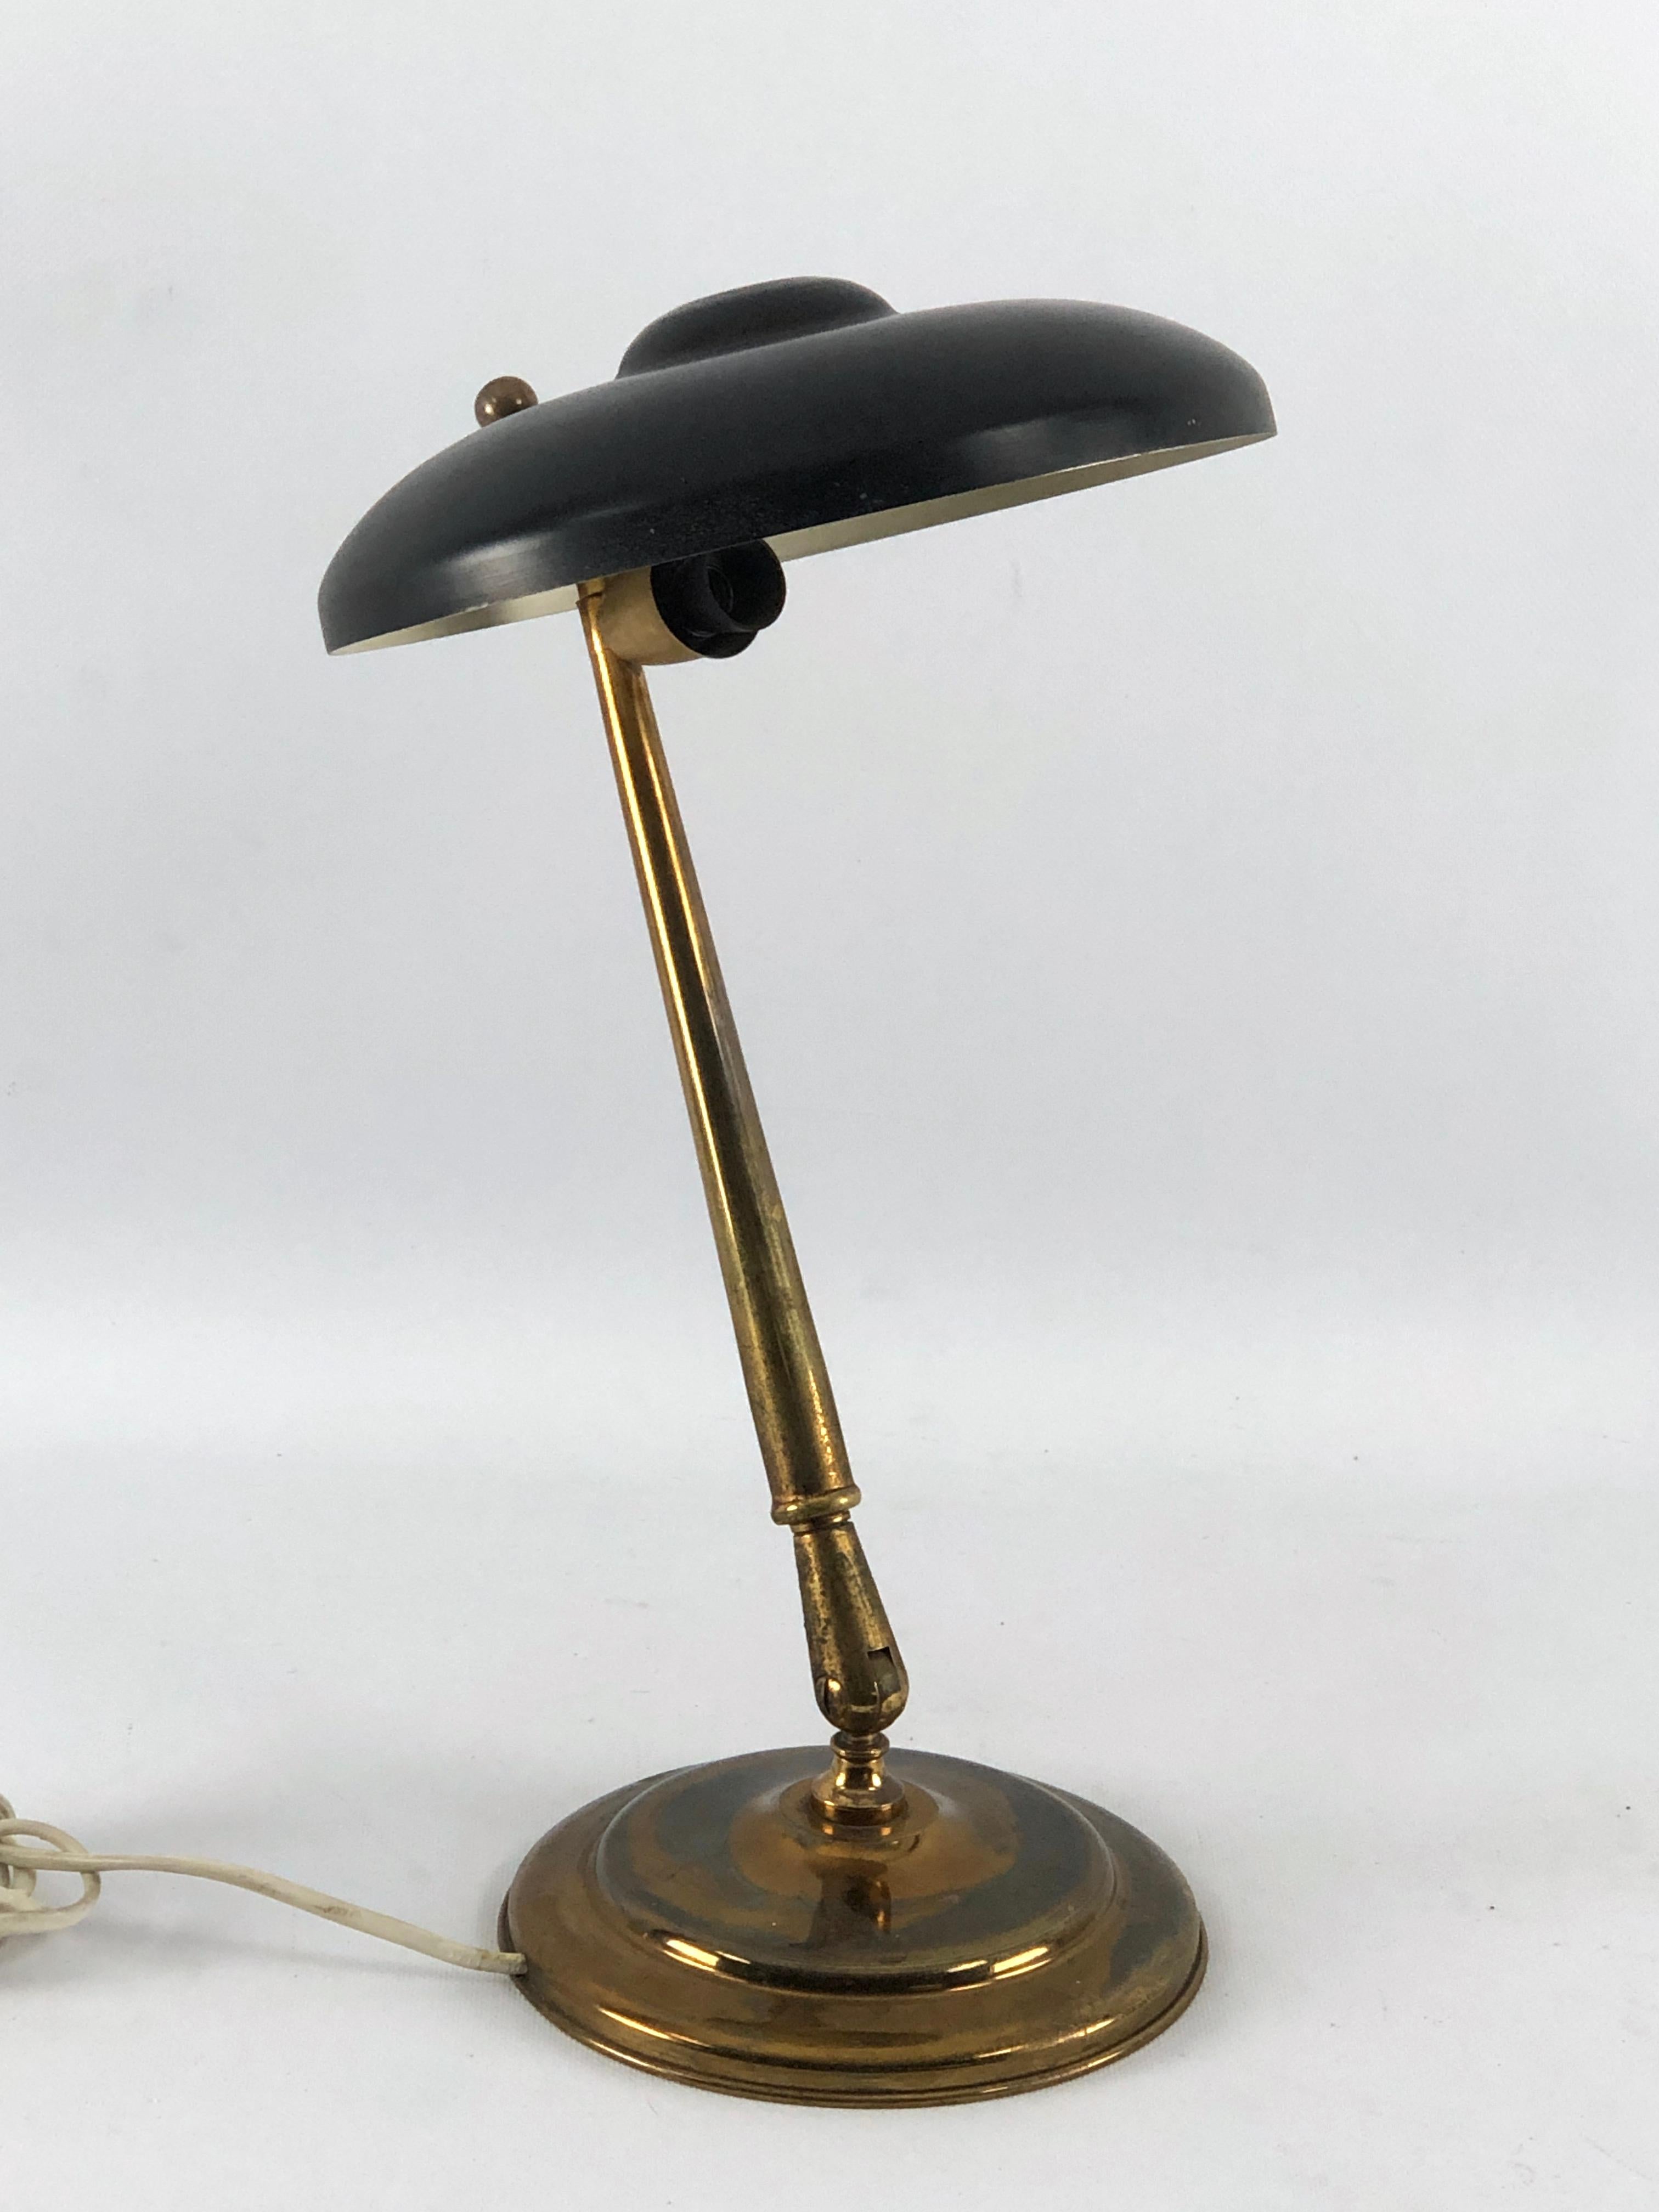 Original vintage condition with trace of age and use for this table lamp produced by Lumi during the 50s. Made from brass and lacquer, both of them with original patina.